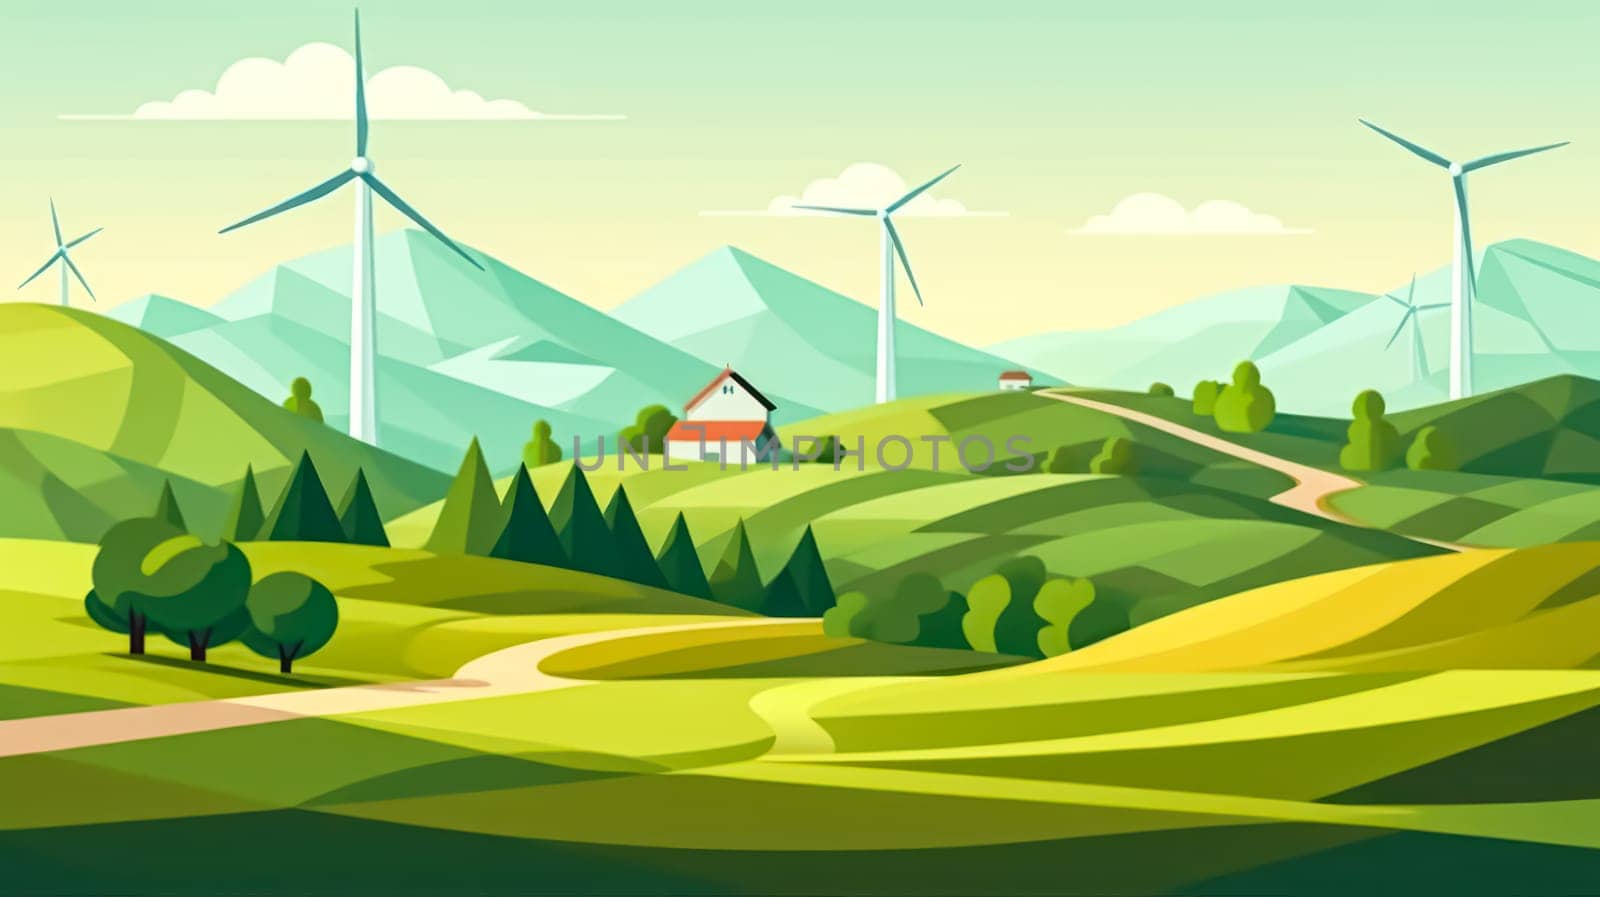 concept of an eco home private house with solar panels, wind turbines, and mountains in the background. Standard illustration for renewable energy and ecology.